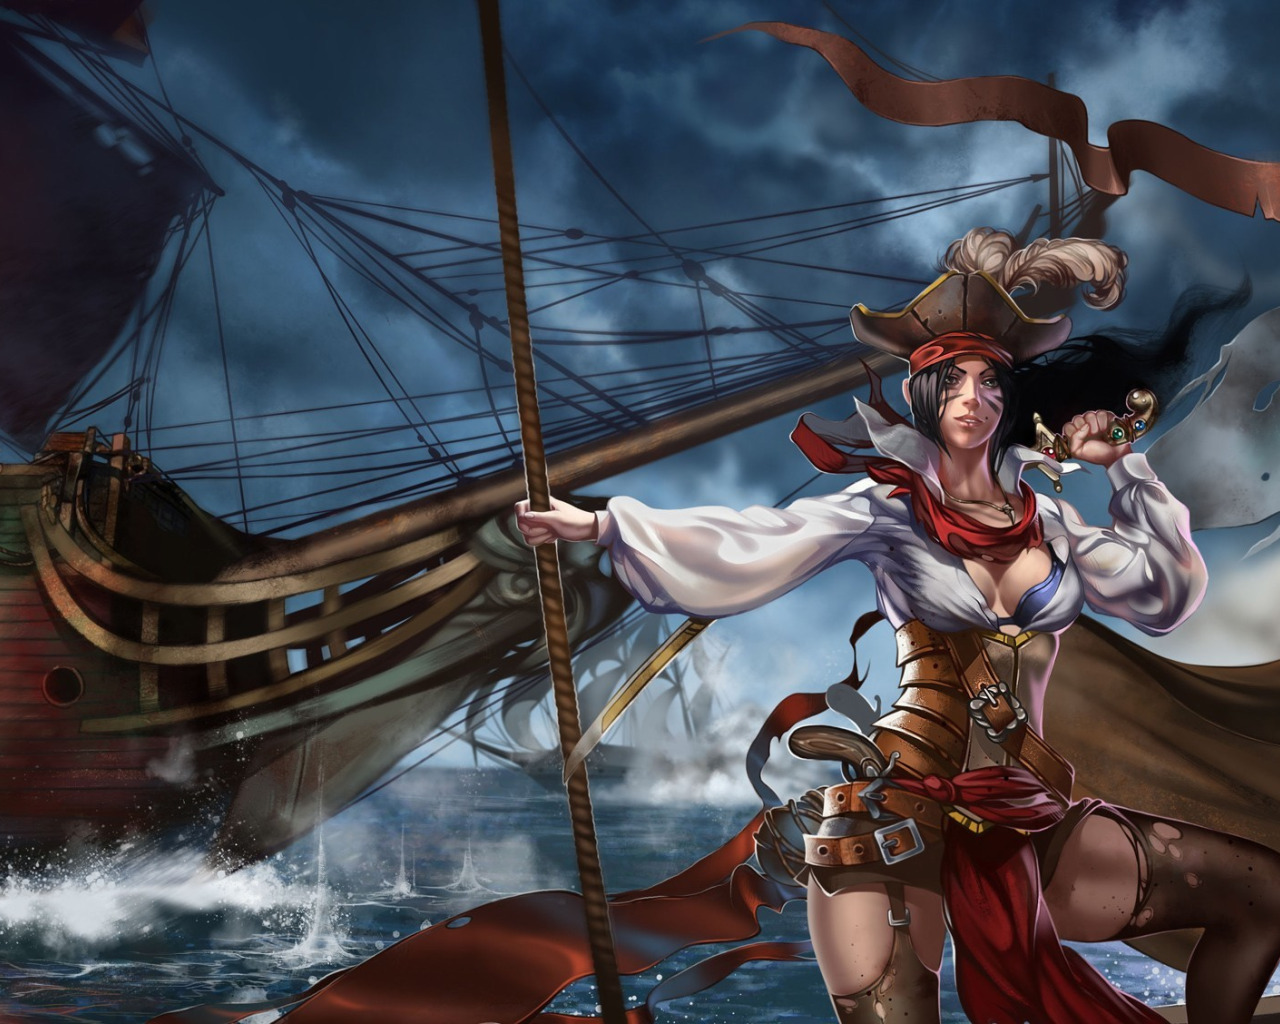 GoodFon.com - Free Wallpapers, download. sea, girl, weapons, the wind, ship, sailboat, art, p...